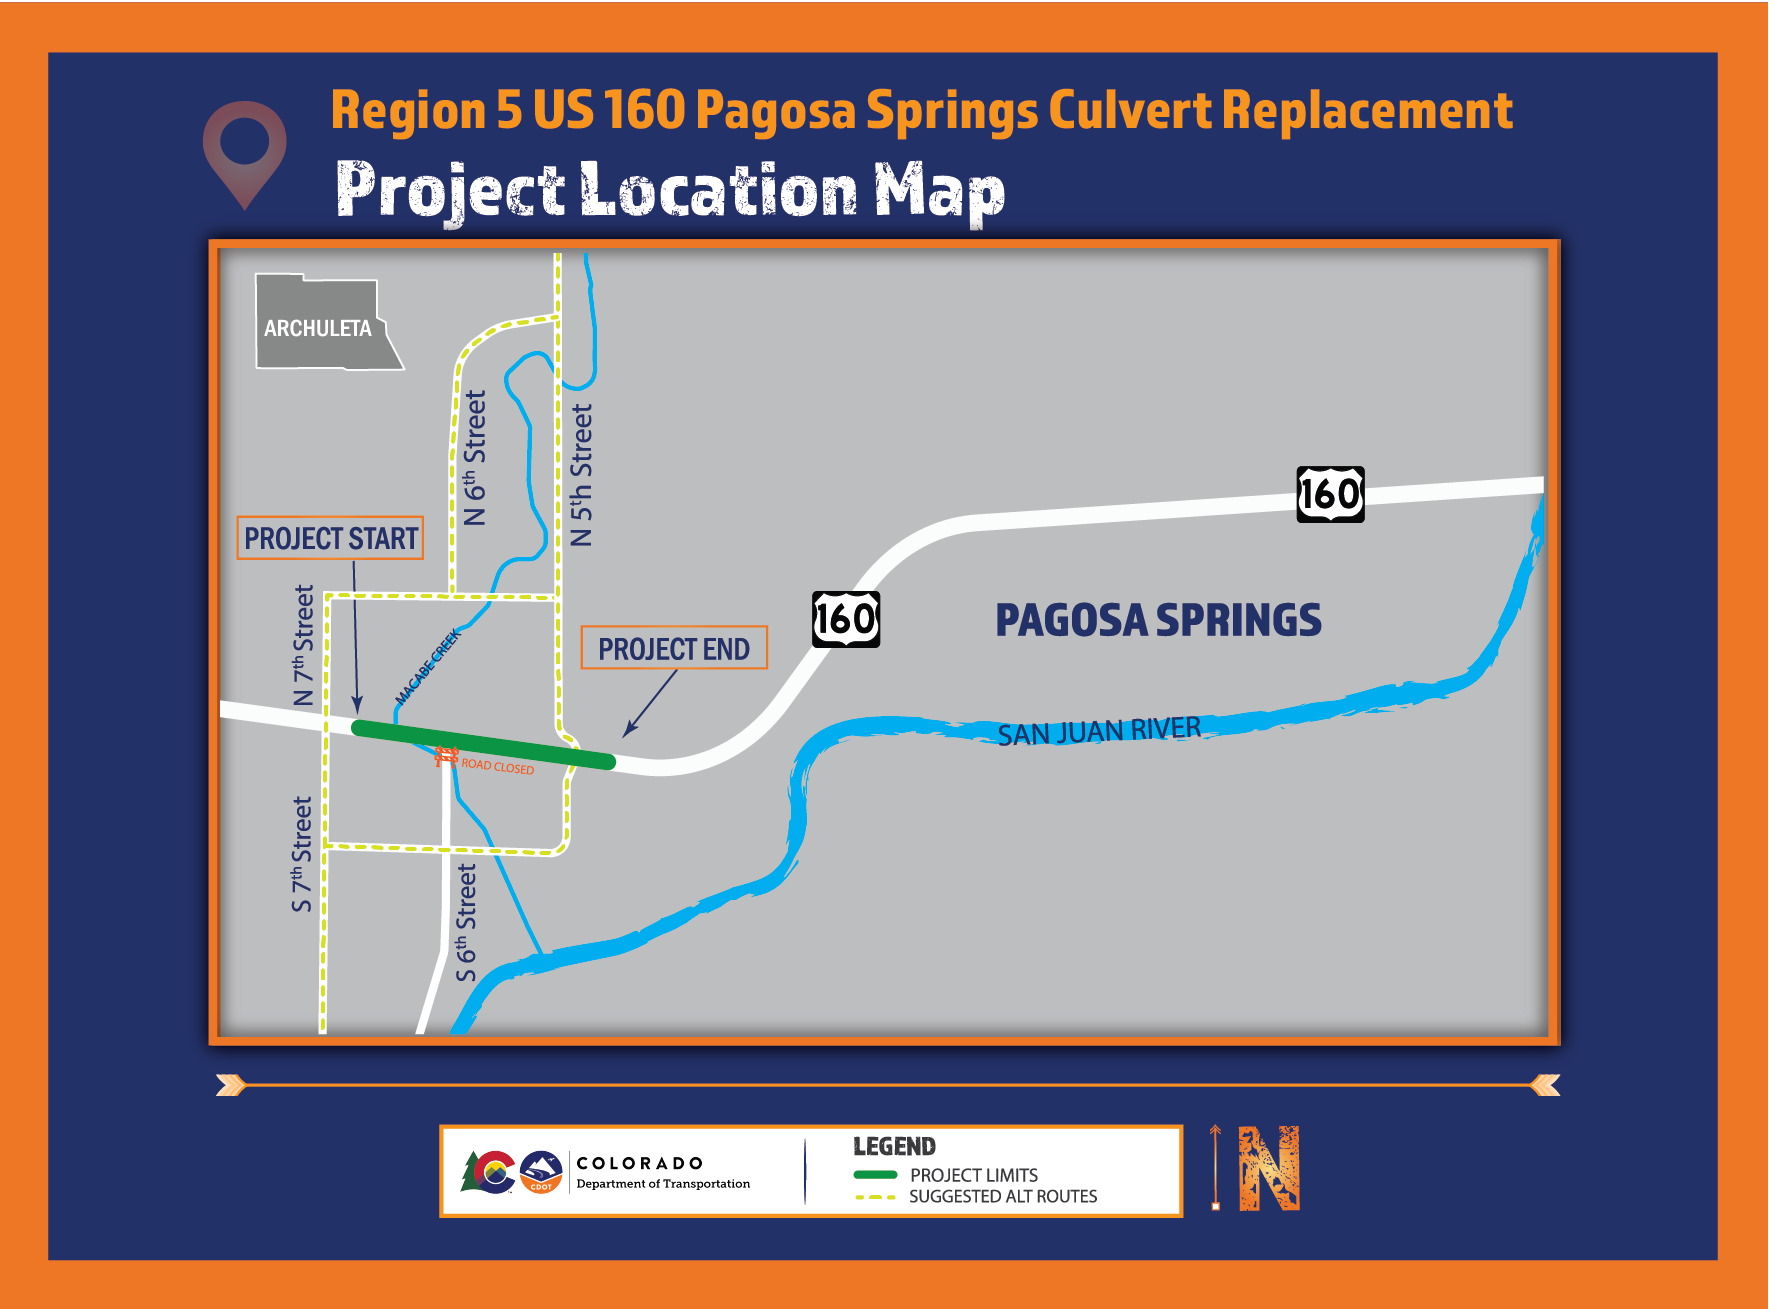 Region 5 US 160 Pagosa Springs Culvert Replacement project map.png detail image